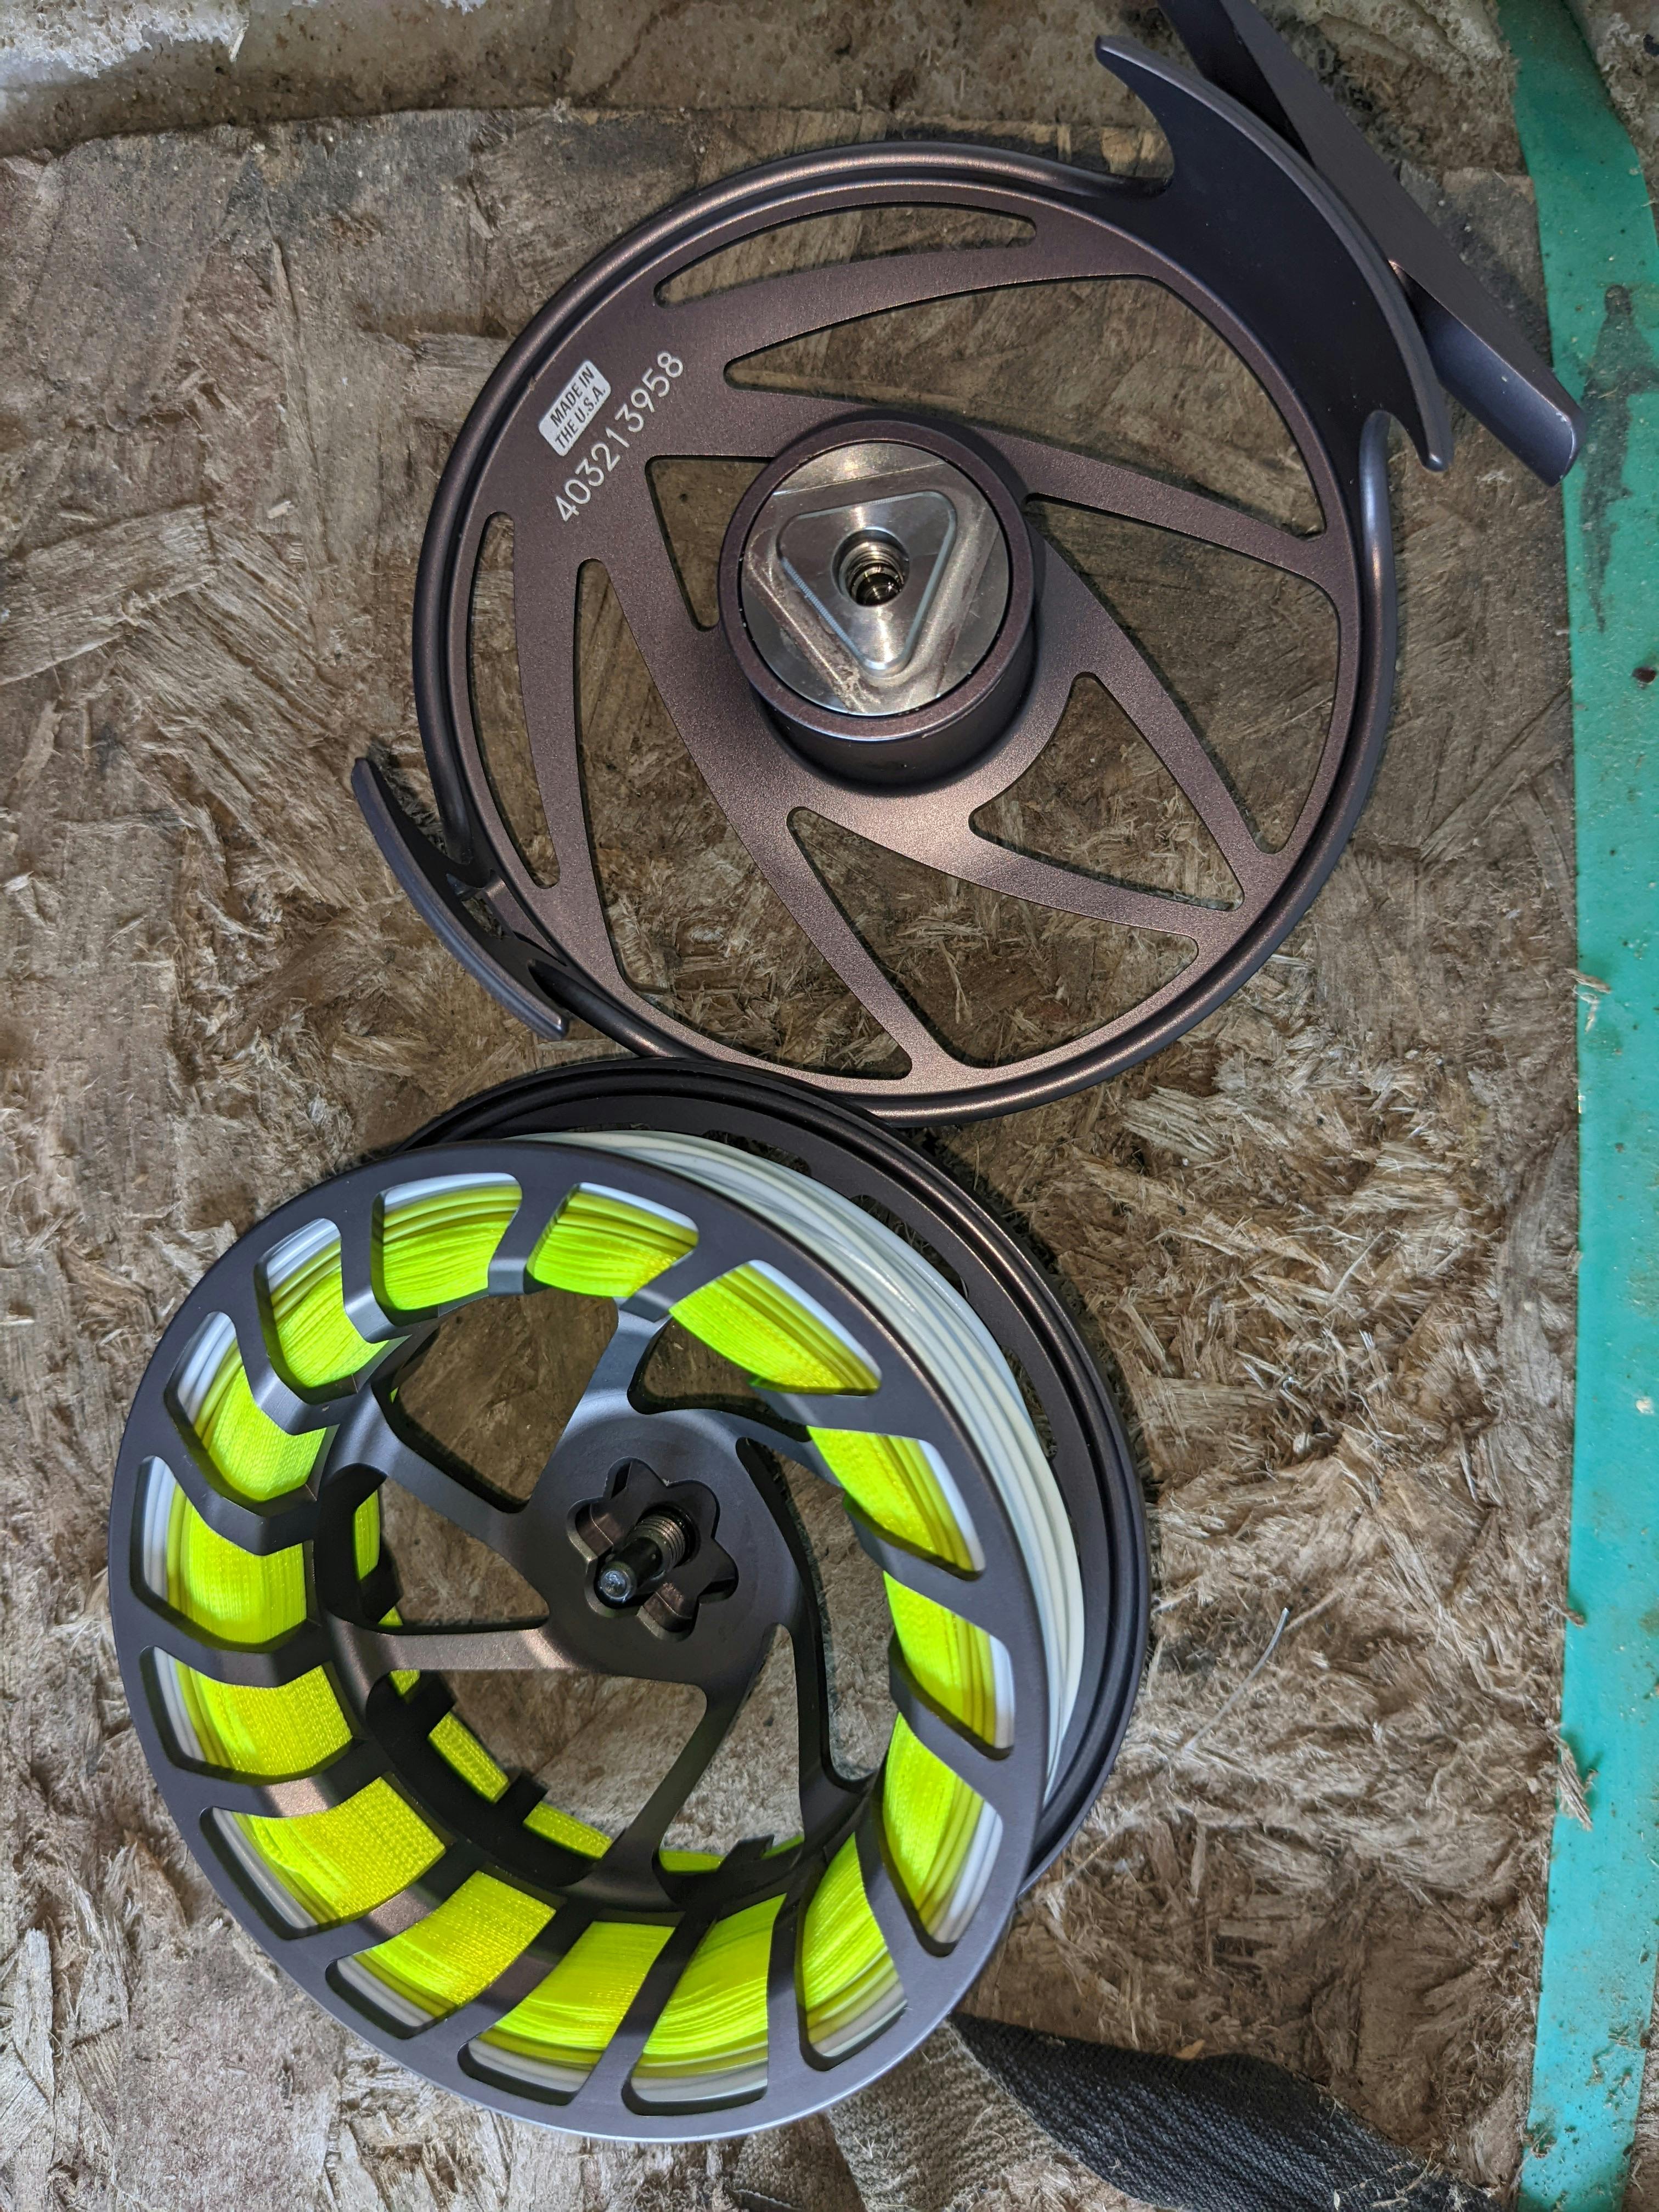 The Orvis Mirage USA Fly Reel.